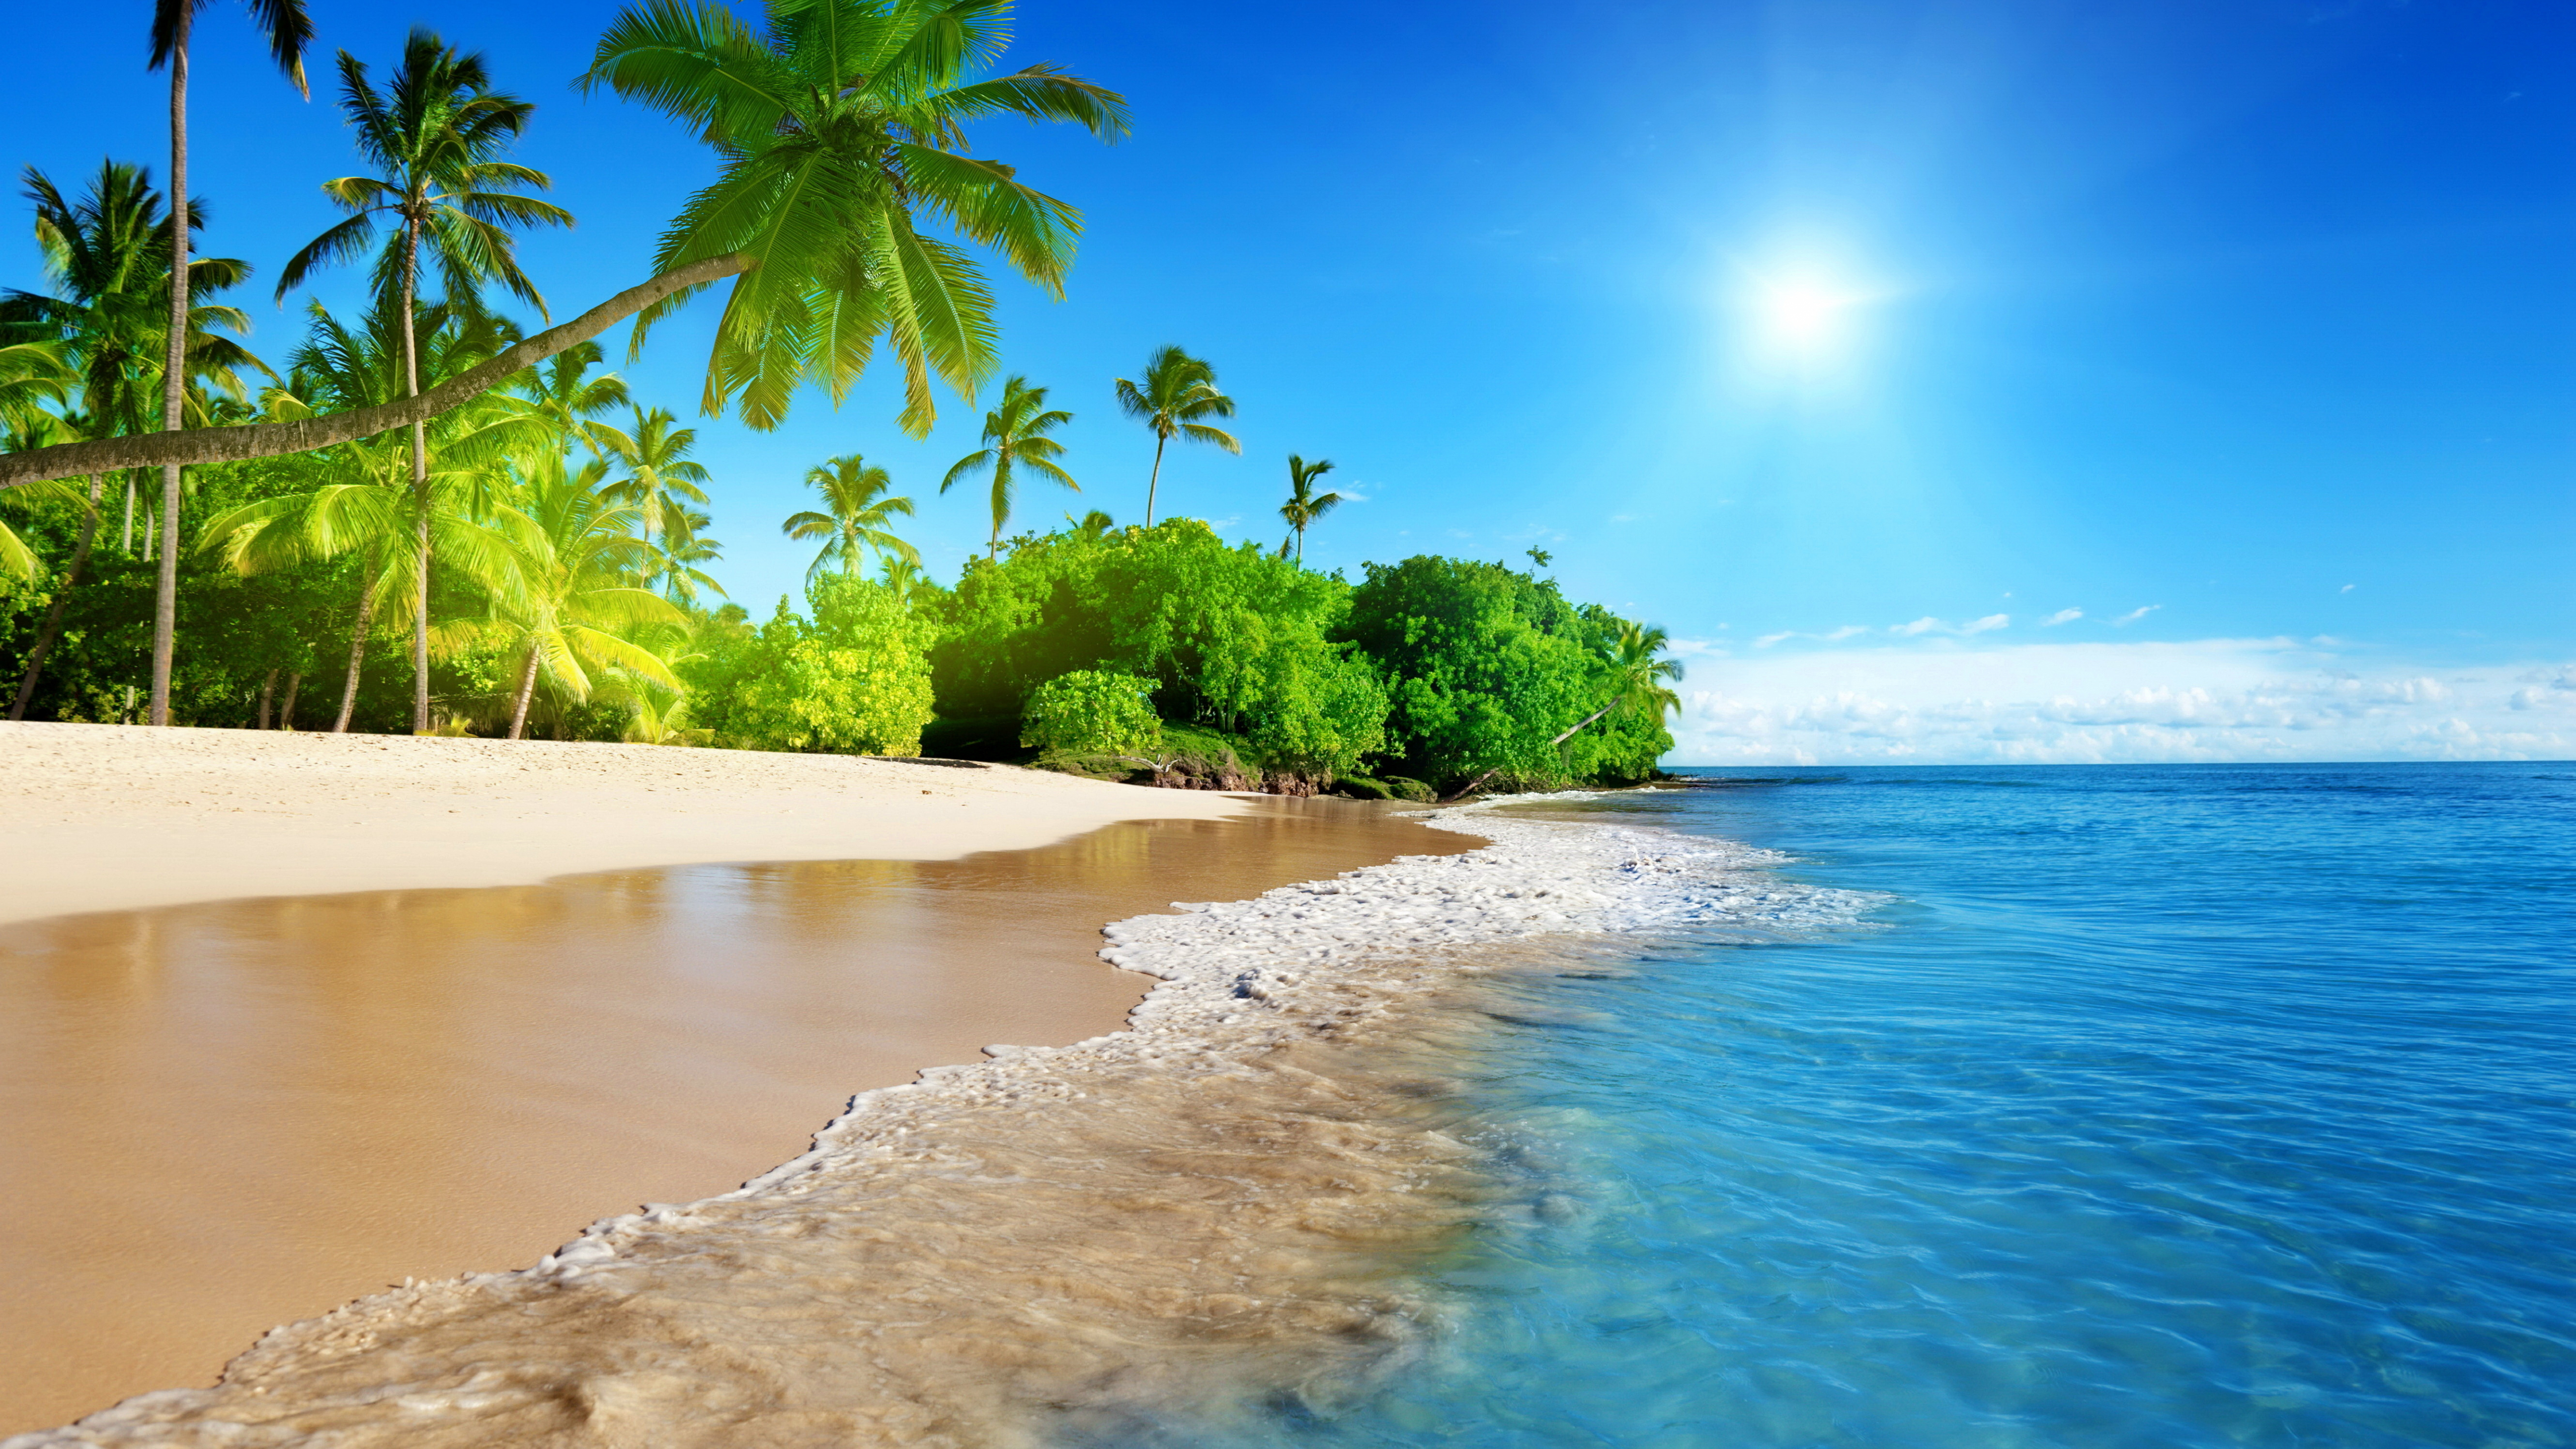 Download wallpaper 5120x2880 tropical beach, sea, calm, sunny day, holiday  5k wallpaper, 5120x2880 5k background, 7041